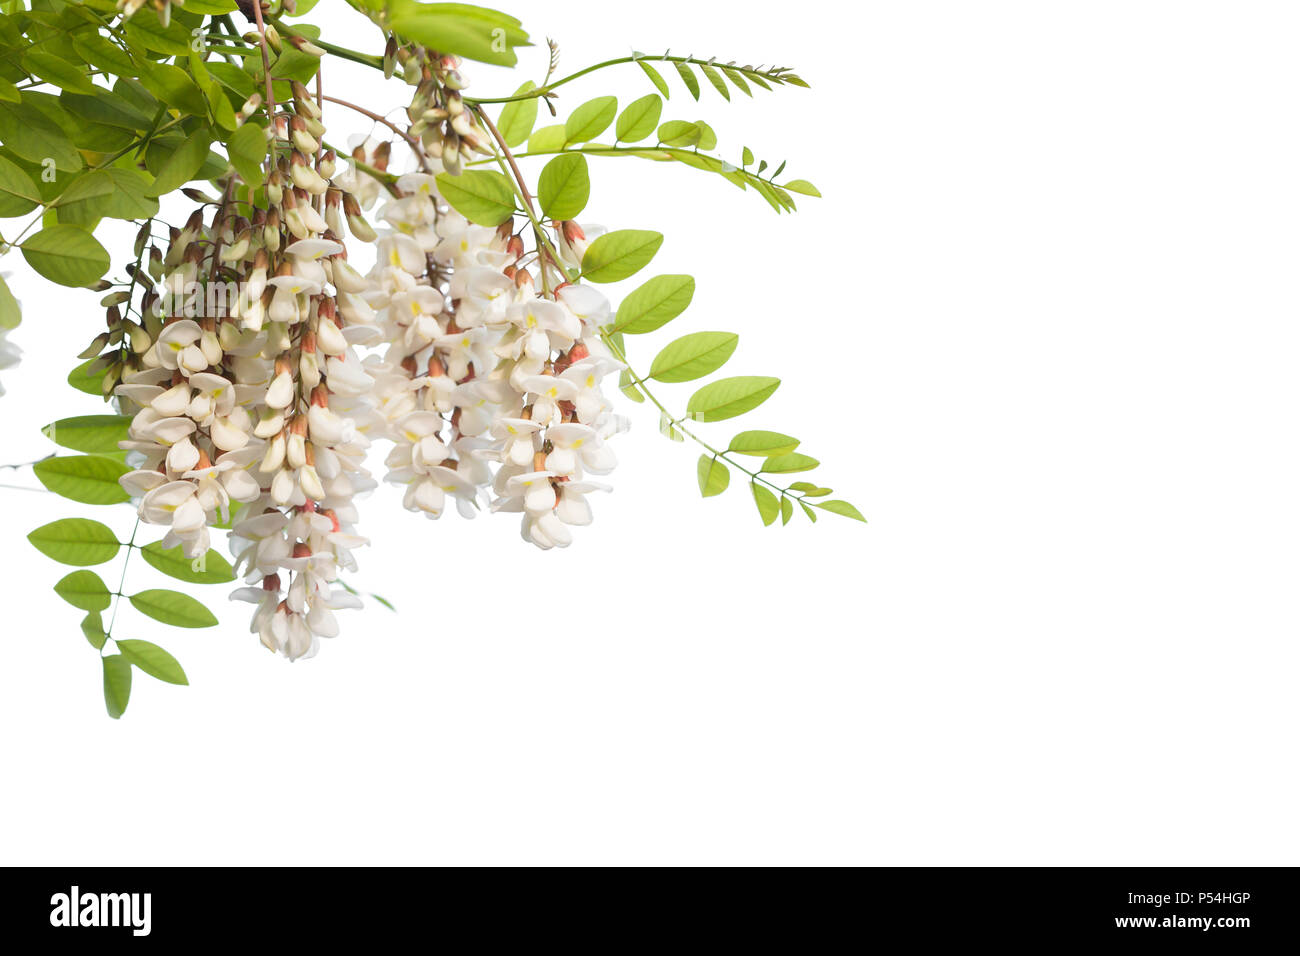 White flowers on branch of Robinia pseudoacacia or black locust isolated on white background Stock Photo